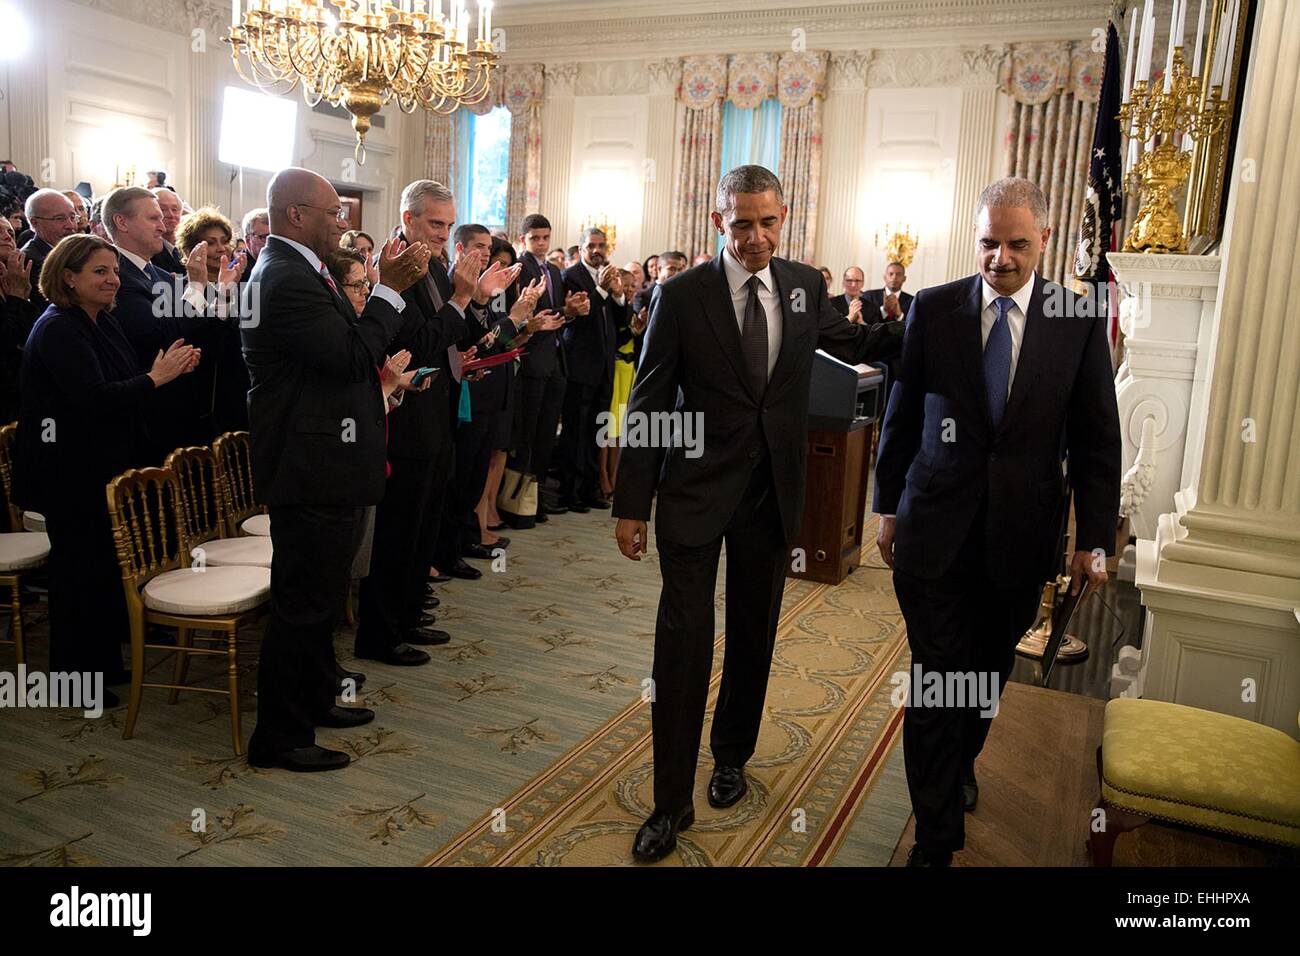 US President Barack Obama and Attorney General Eric H. Holder, Jr. walk together following Holder's resignation in the State Dining Room of the White House September 25, 2014 in Washington, DC. Stock Photo